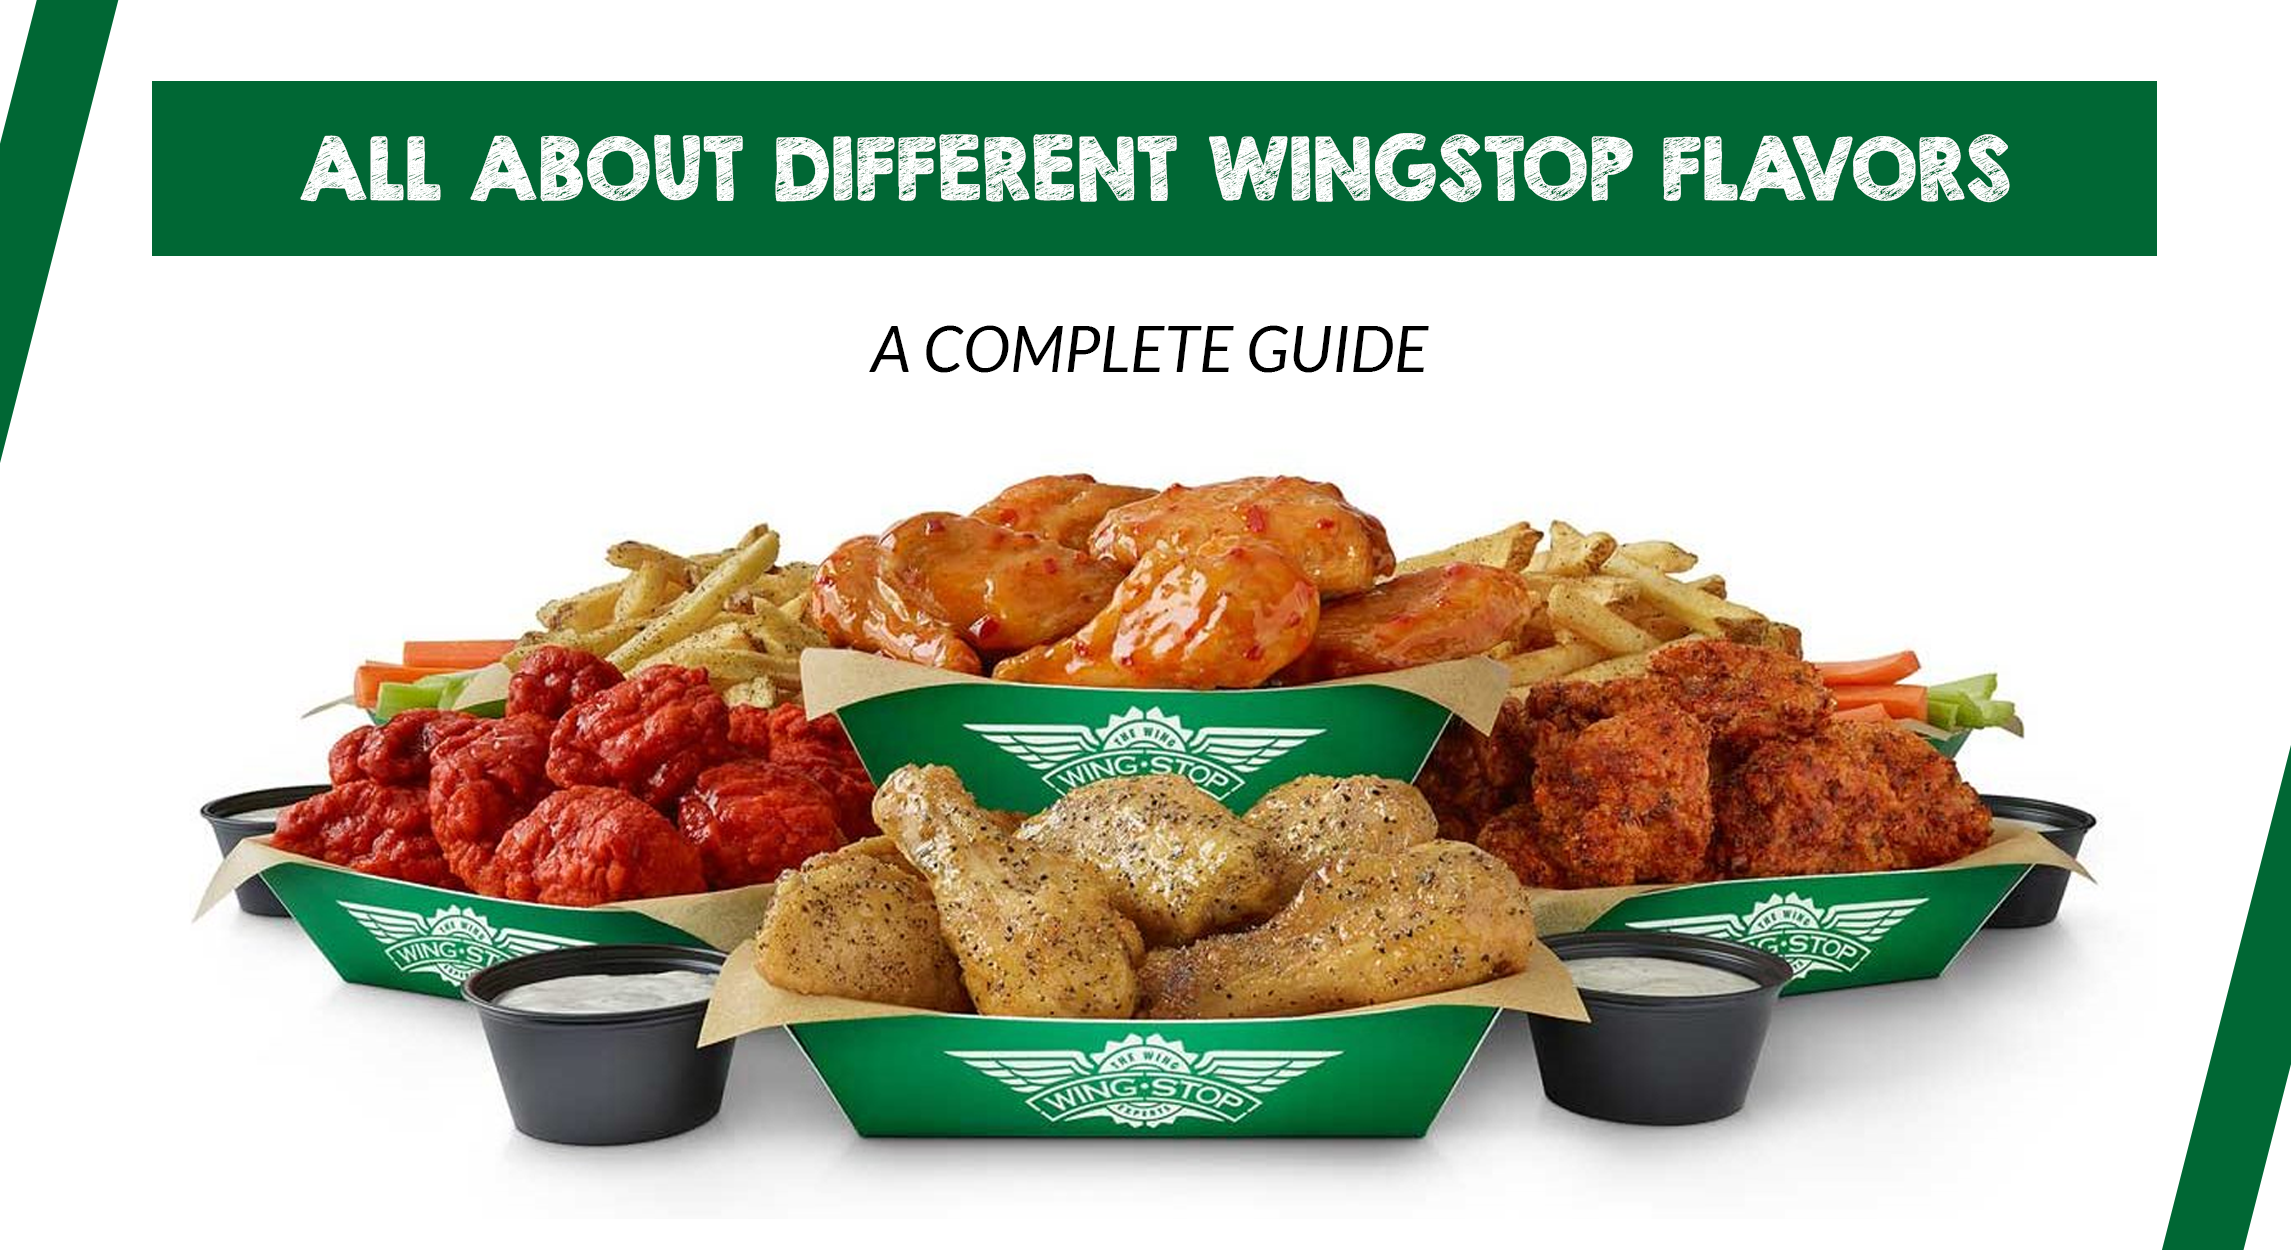 All About Different Wingstop Flavors A Complete Guide 